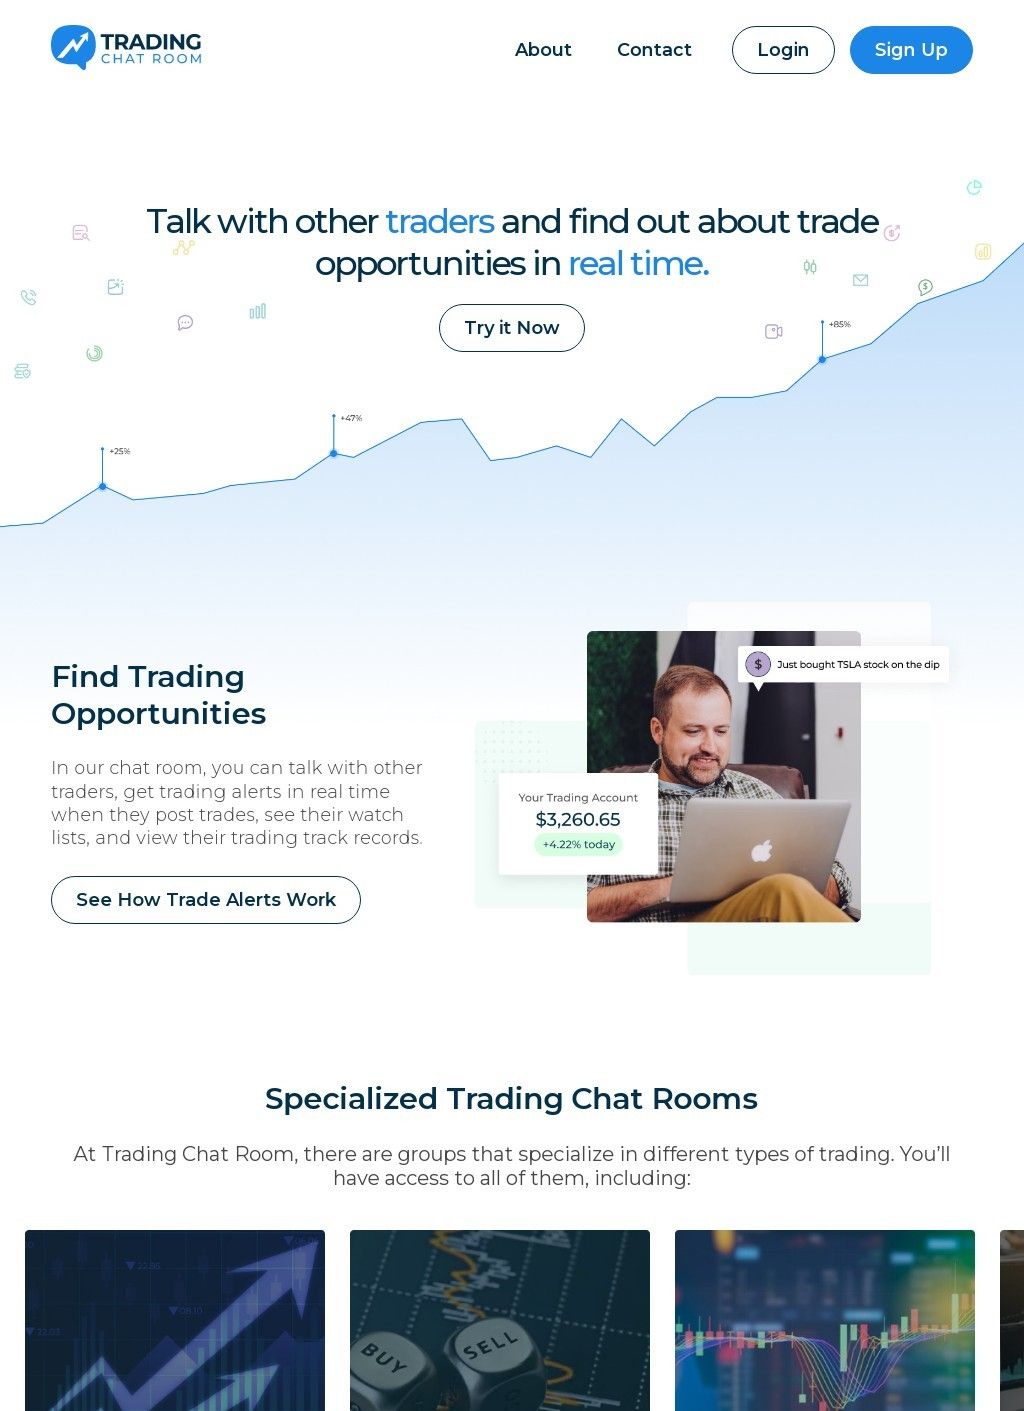 Trading Chat Room